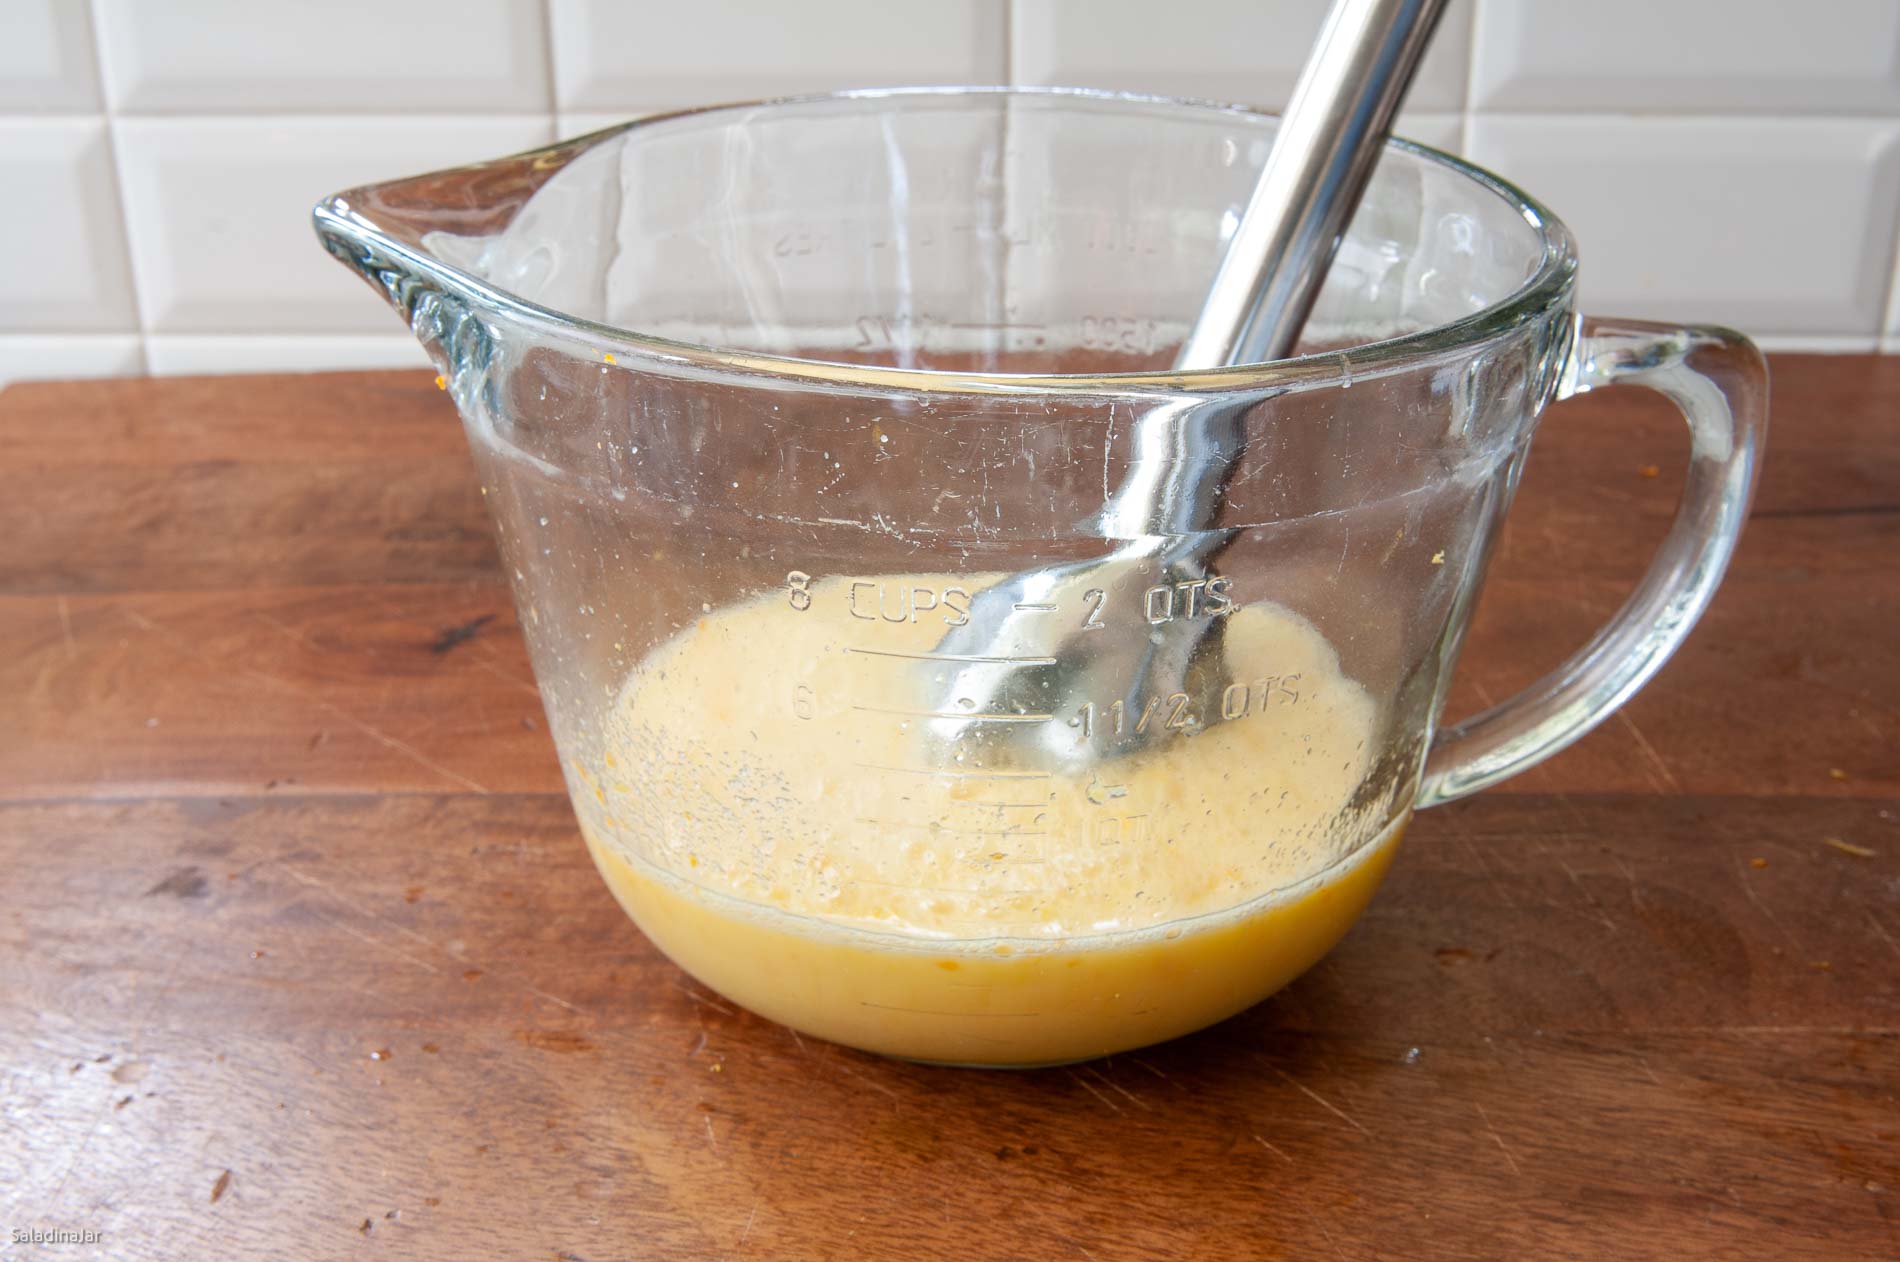 Using an immersion blender to thoroughly mix the eggs, sugar, juice, rind and salt.